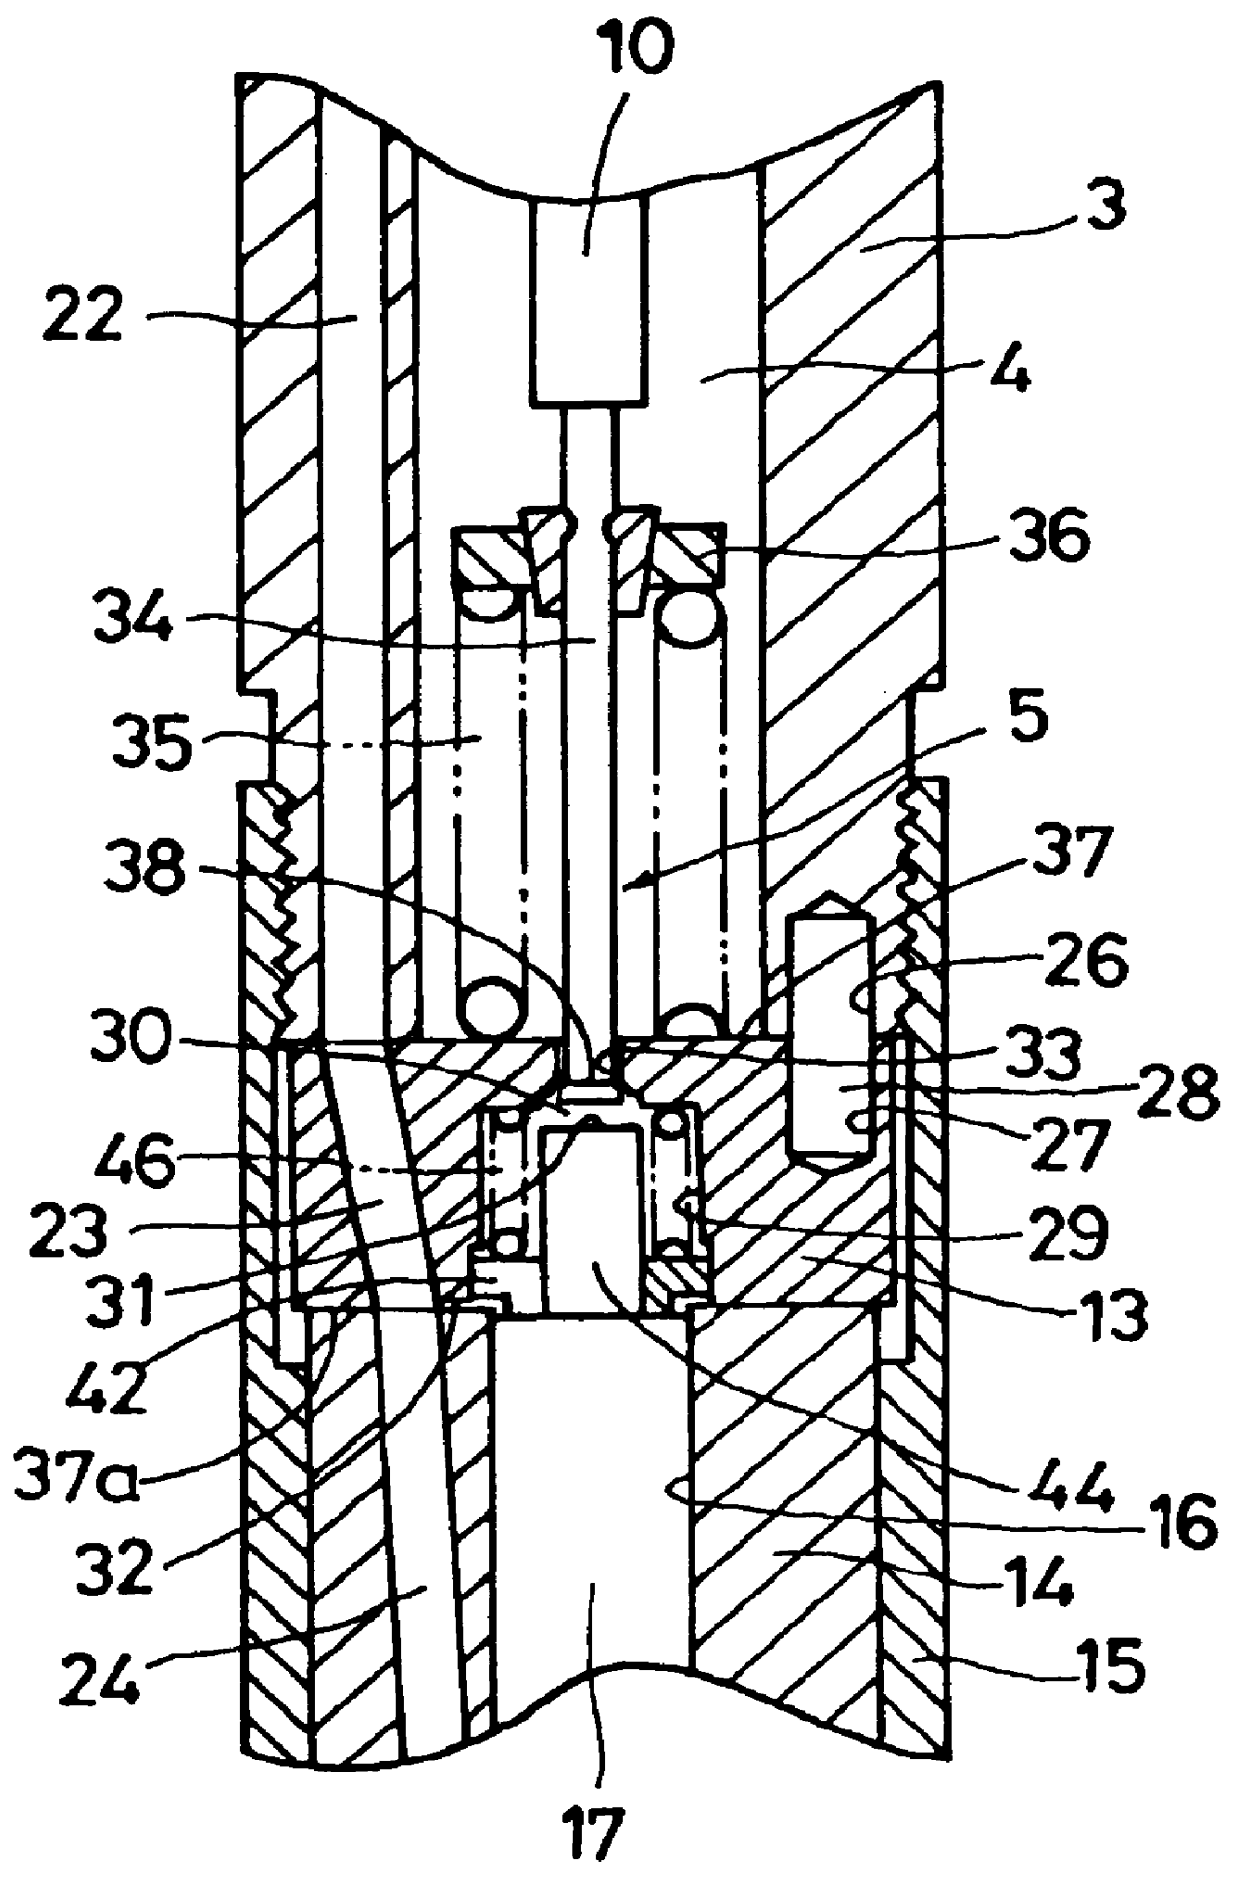 Fuel injector device for engines